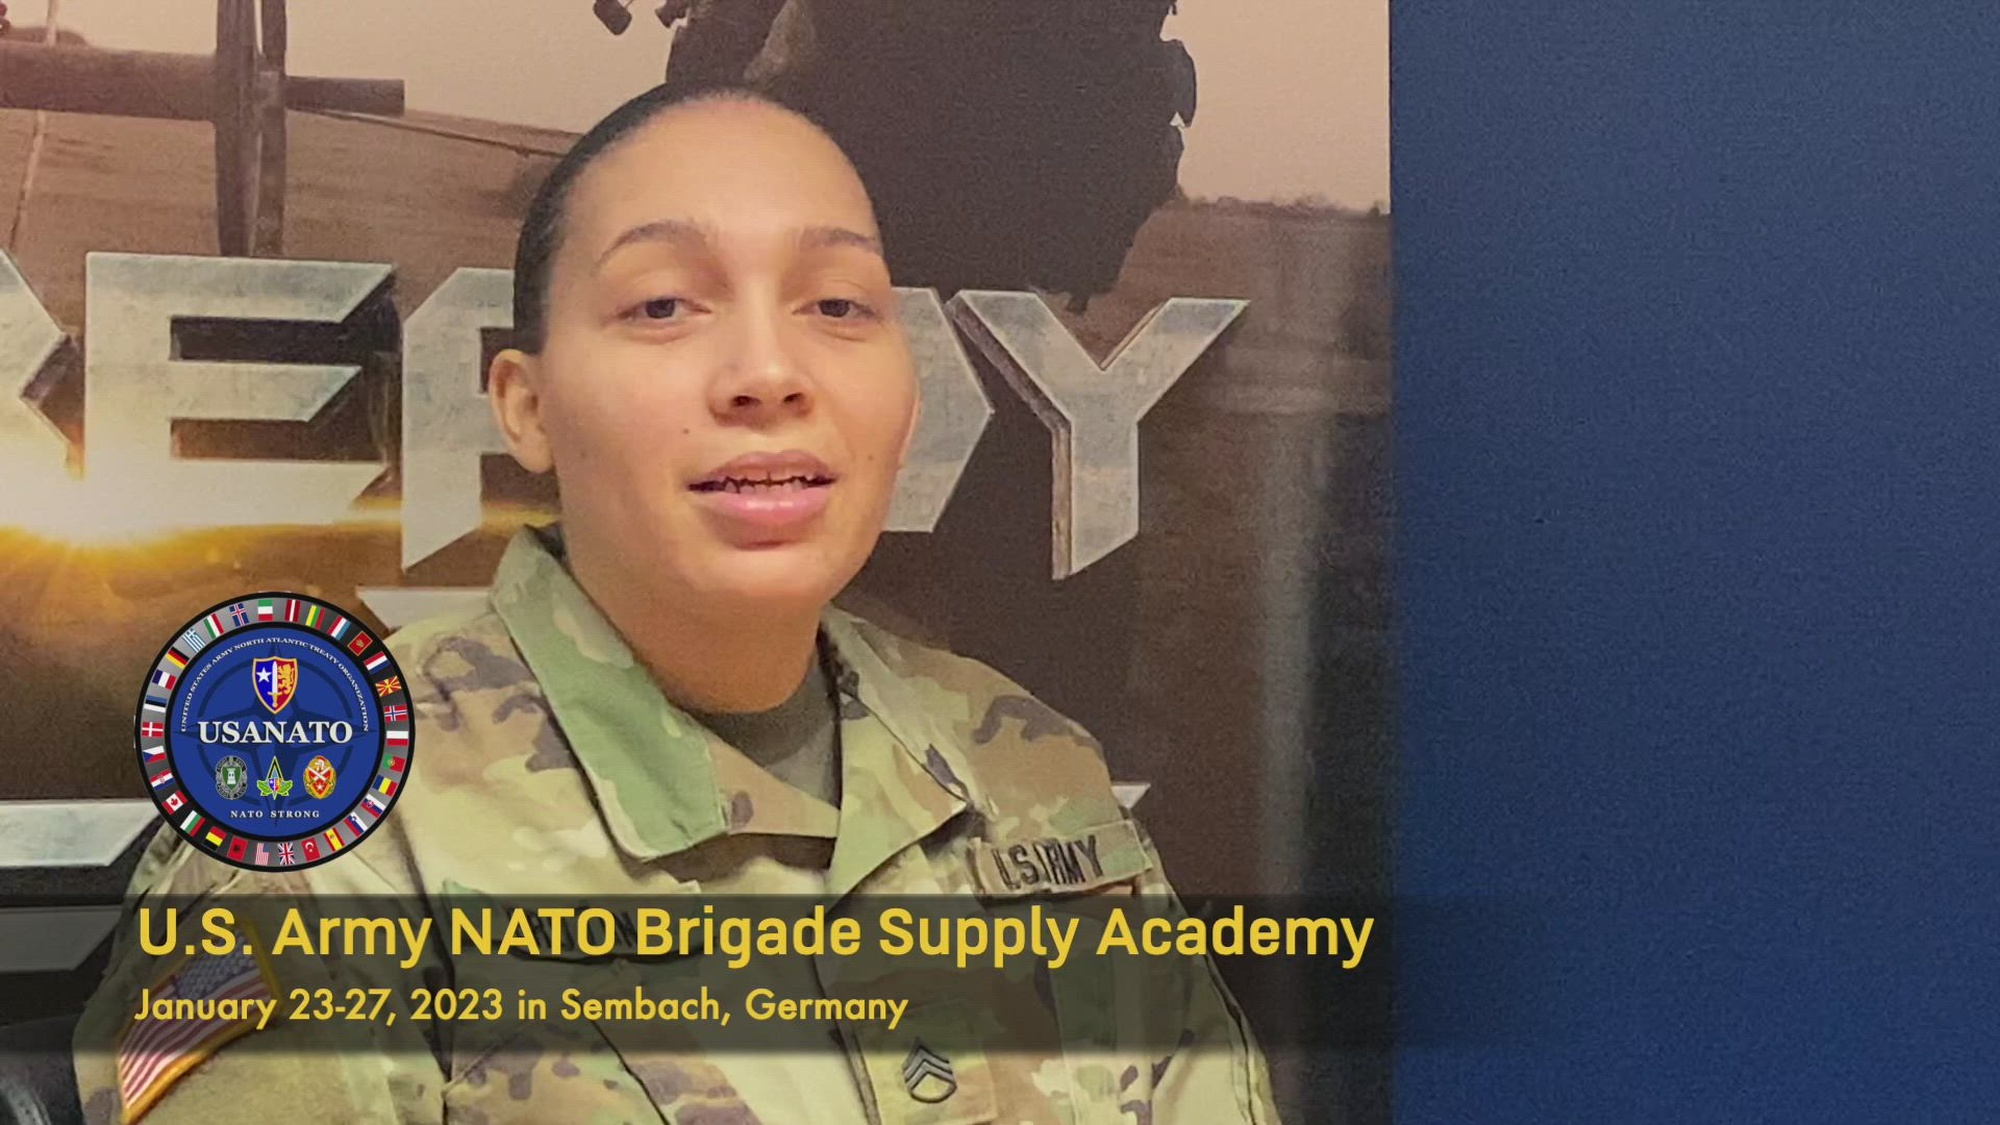 U.S. Army NATO Brigade hosted a Supply Academy Jan. 23-27 in Sembach, Germany to providing training to supply specialists assigned to support NATO units across Europe. #StrongerTogether #WeAreNATO